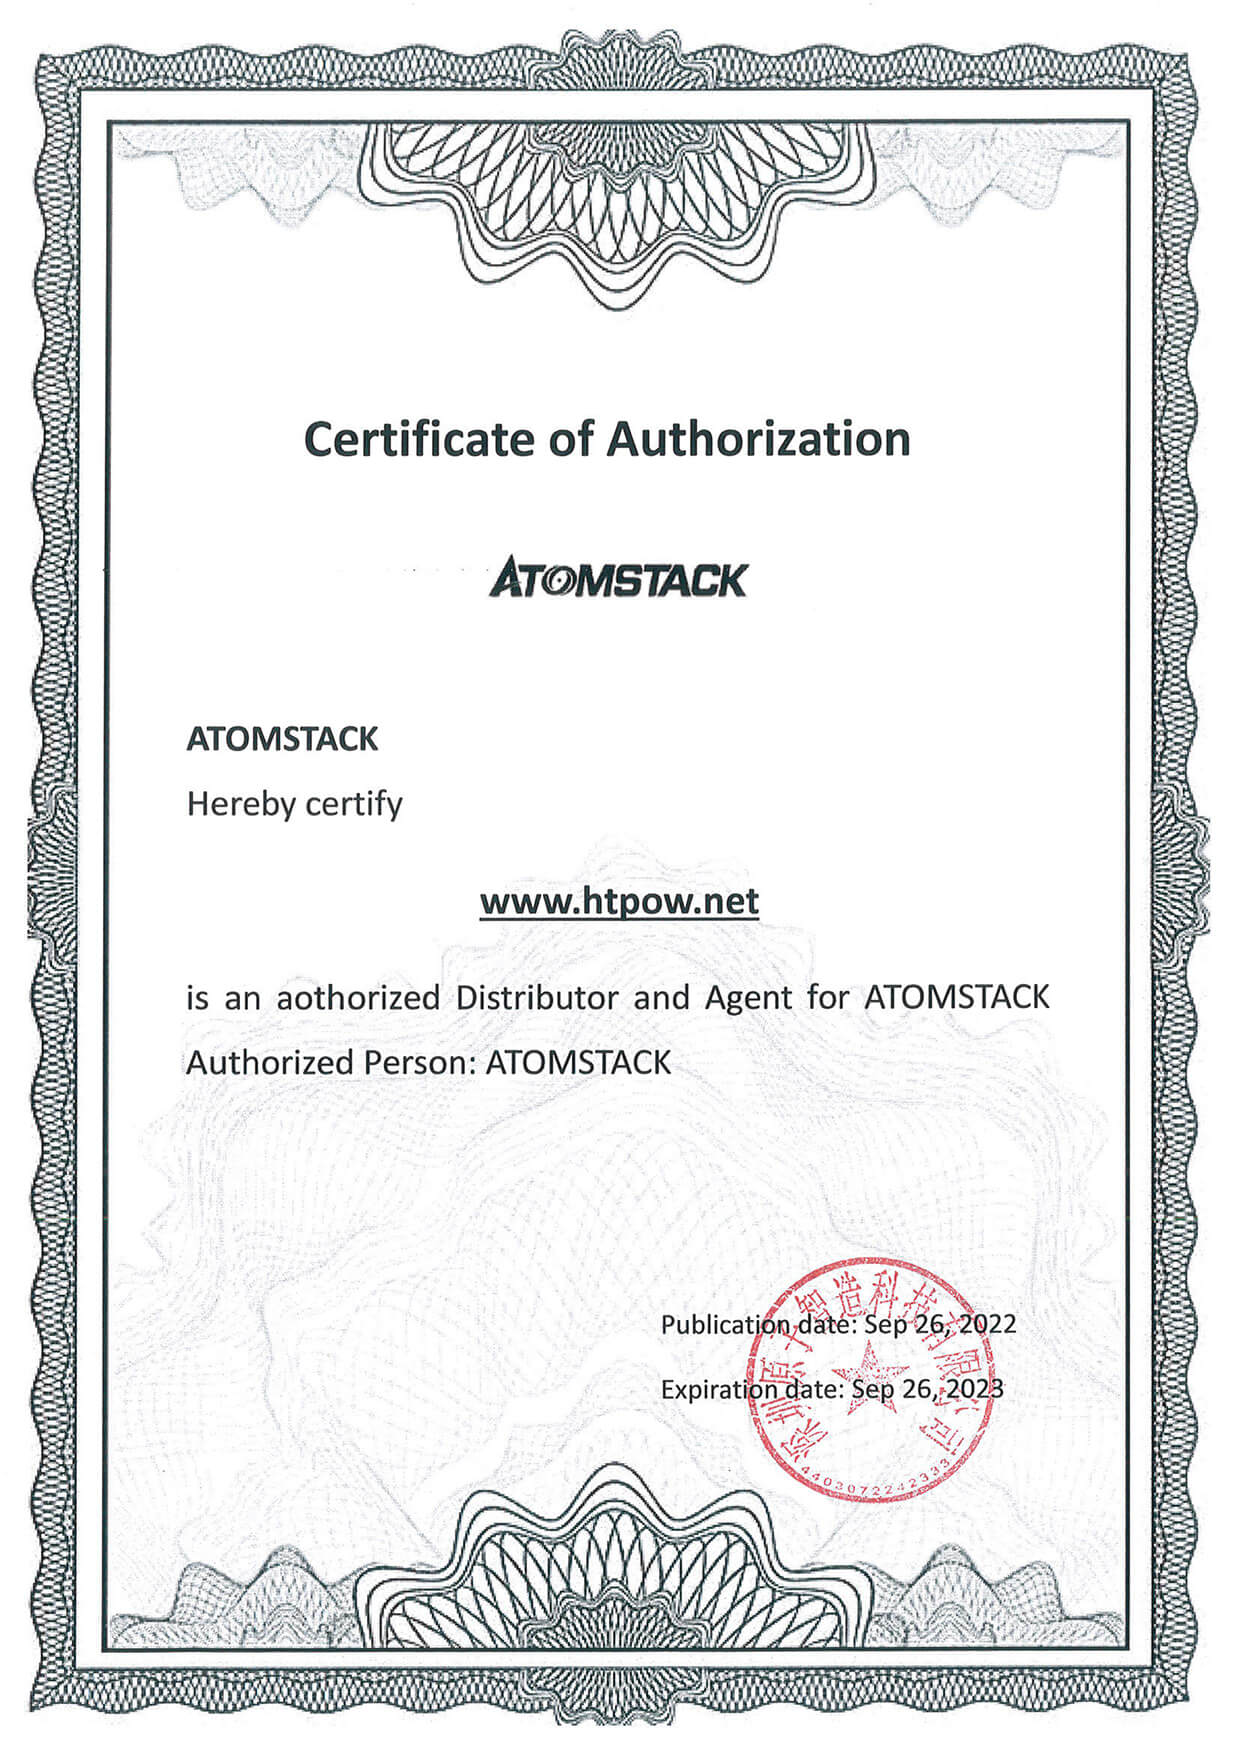 atomstack certificate of authorization